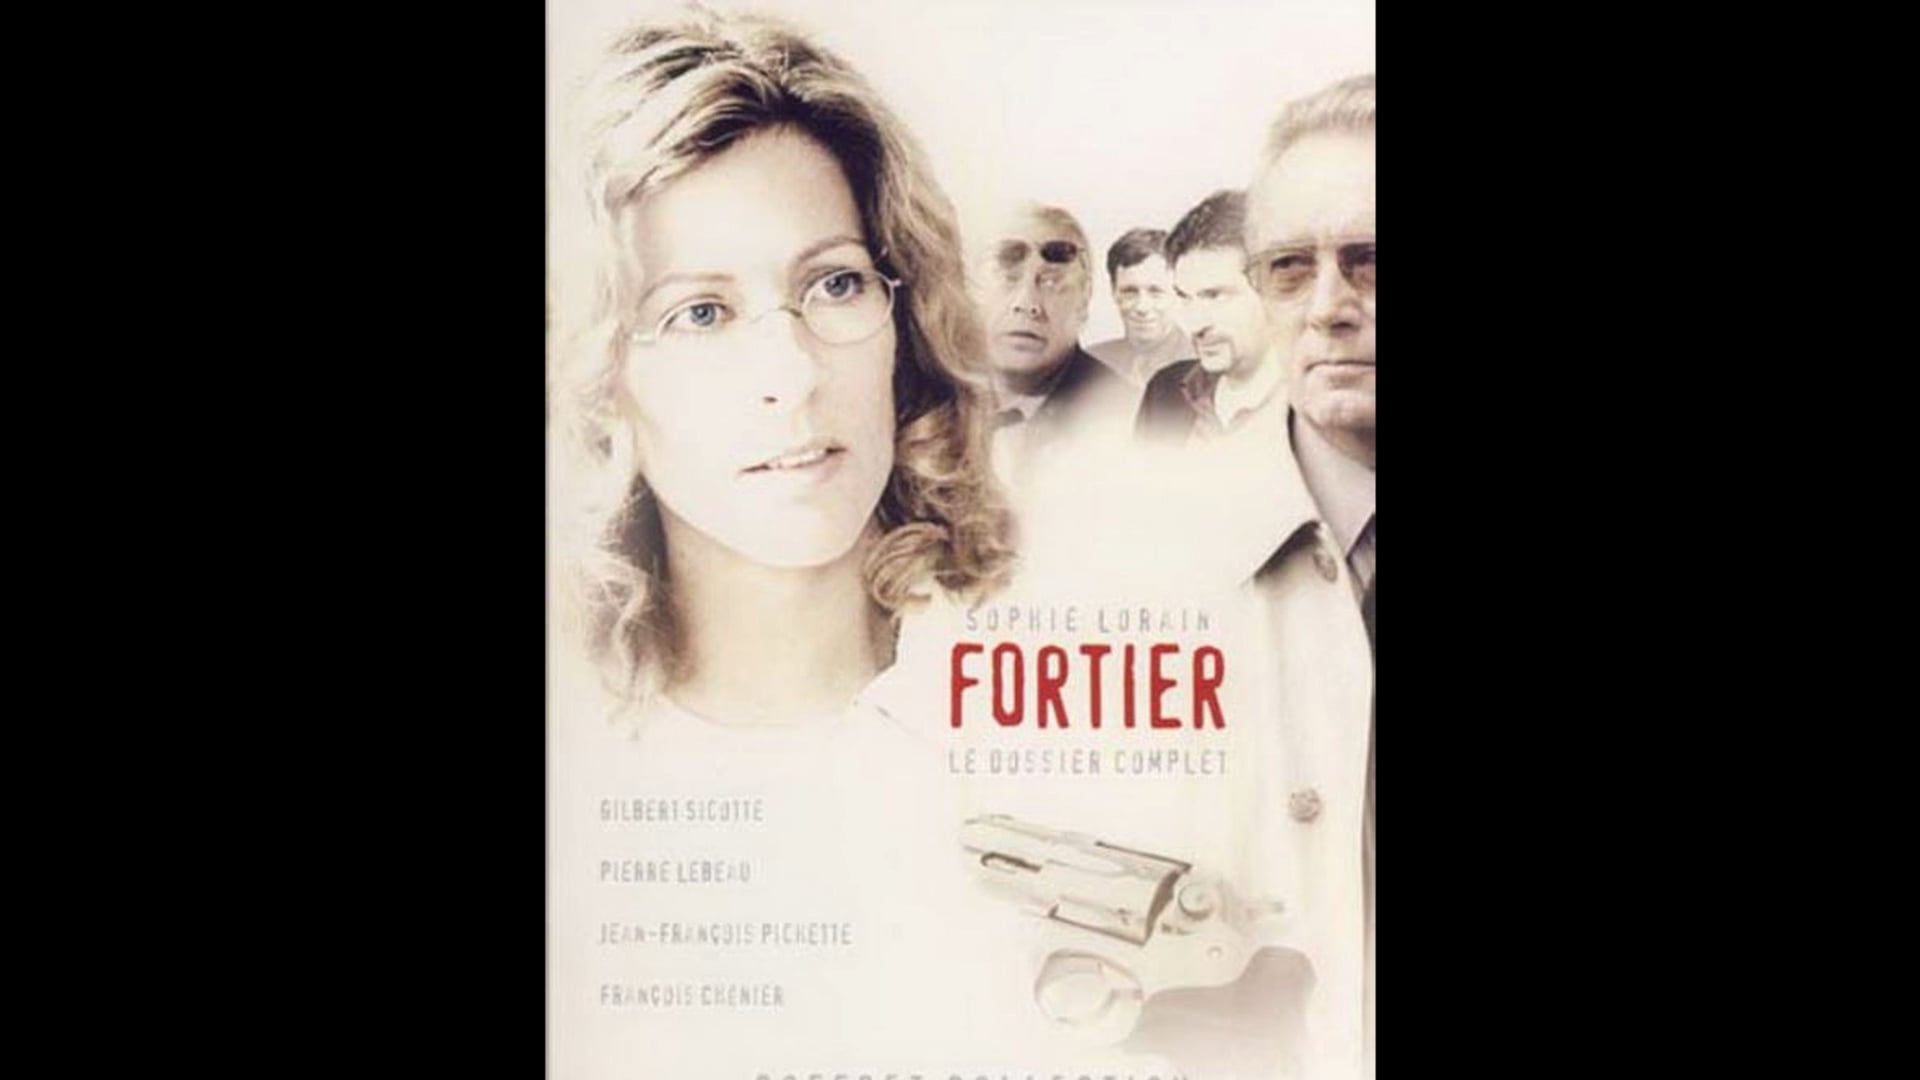 FORTIER